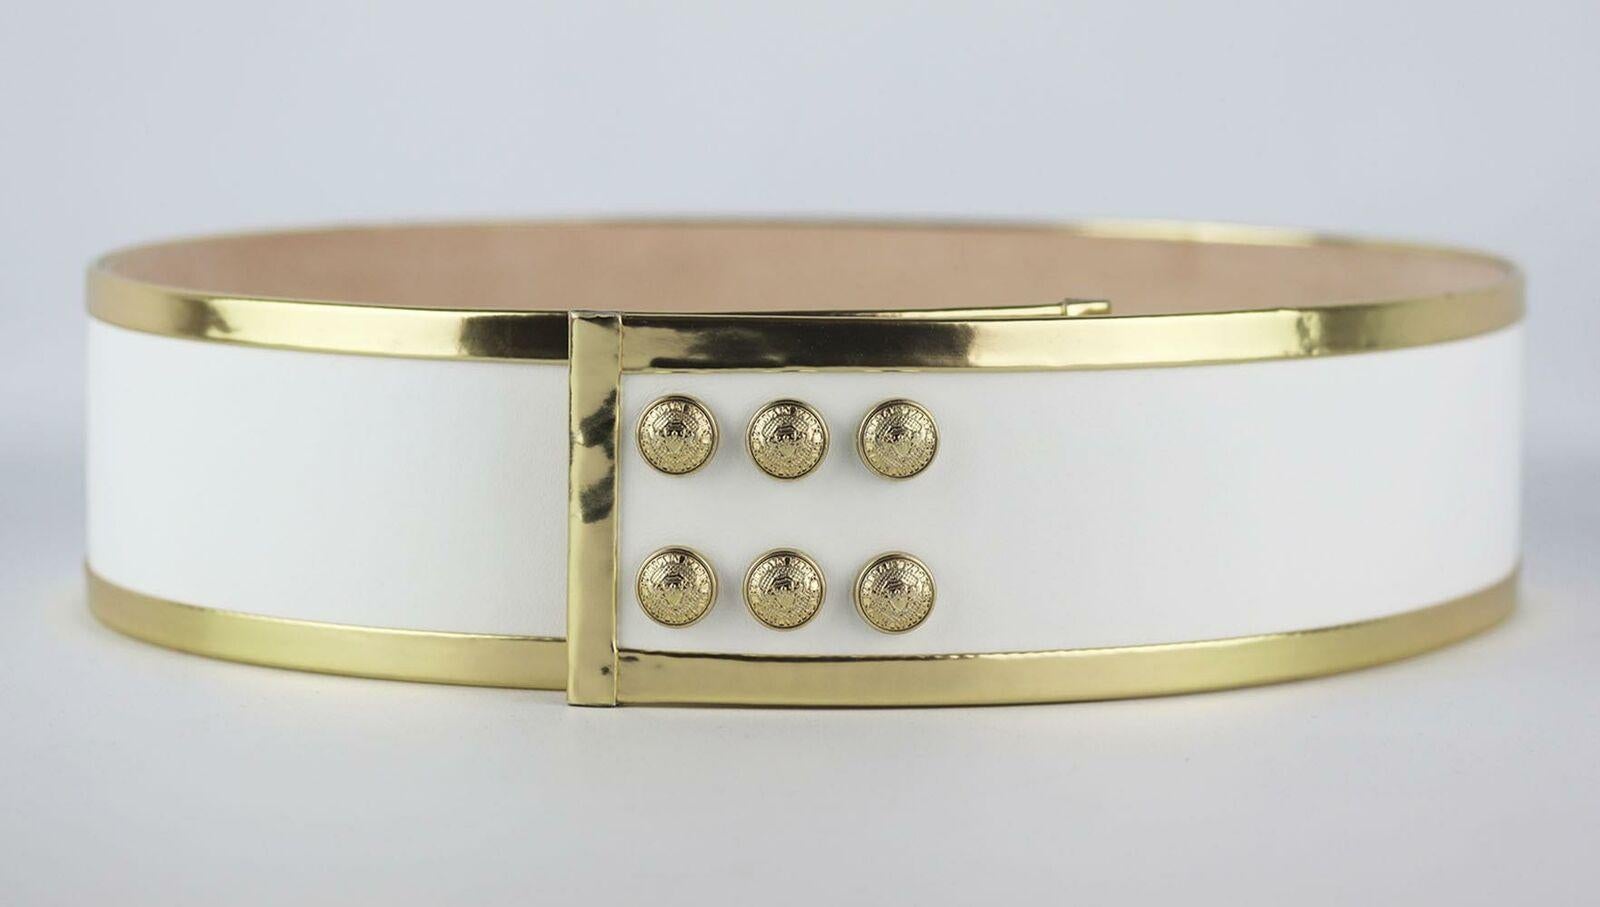 We can always count on Balmain for a glamorous finishing touch - this waist belt is made from soft white and gold leather, it has snap fastening and you'll notice they're the same the lion-embossed buttons that adorn the brand's iconic